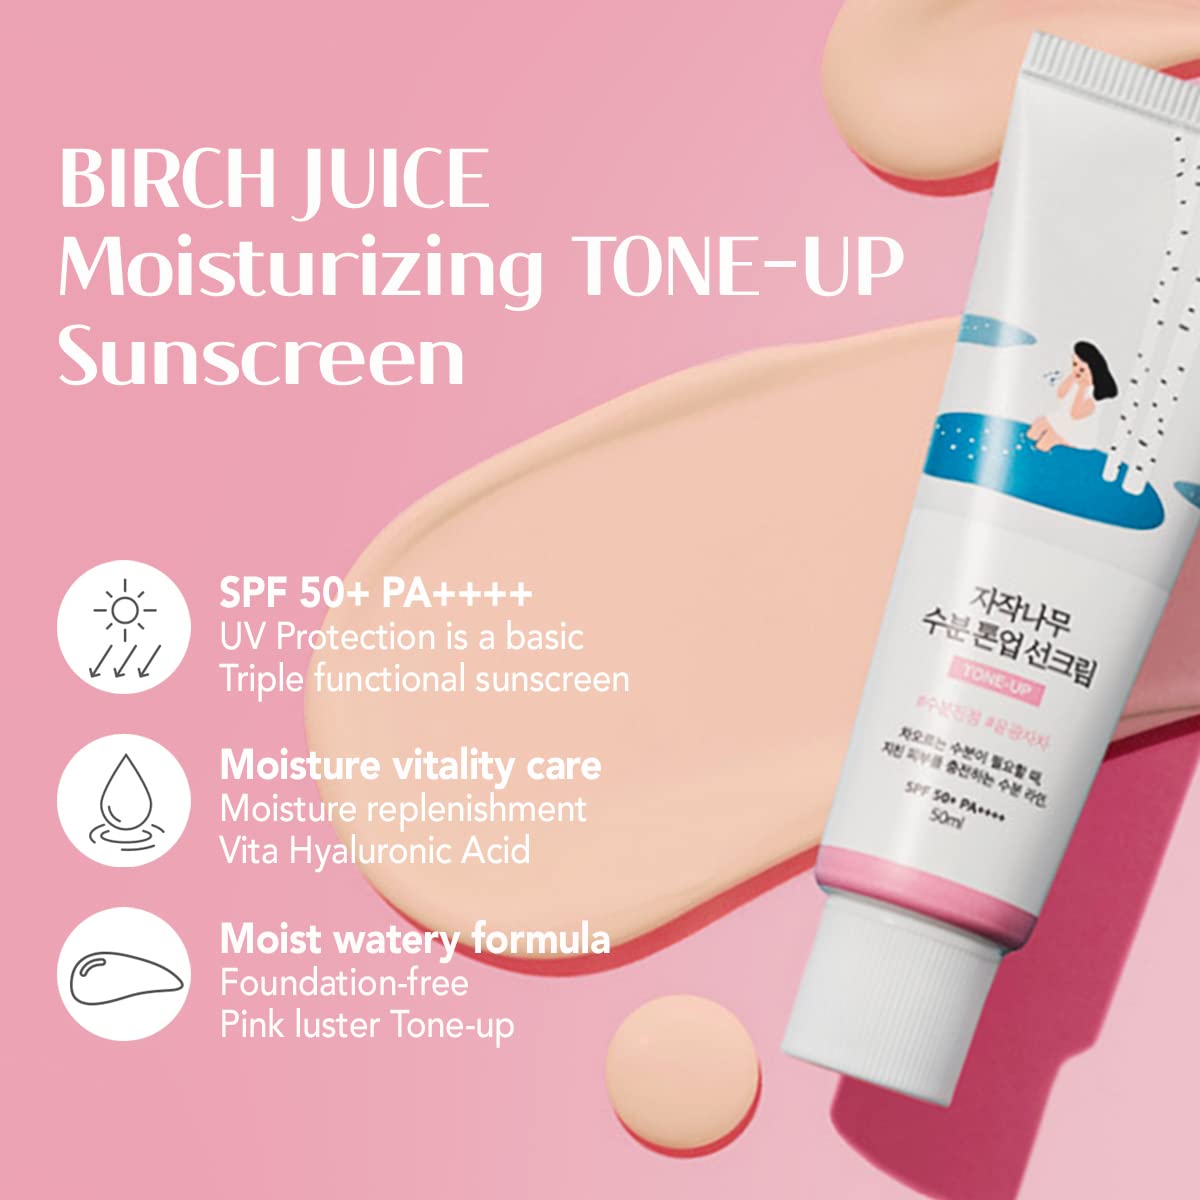 ROUND LAB Birch Juice Moisturizing Tone Up Sunscreen 50mL, No White Cast, Strong UV Protection, Moist Essence Type, Ocean Friendly-Reef Safe, 1.69 Fl Oz (Pack of 1)